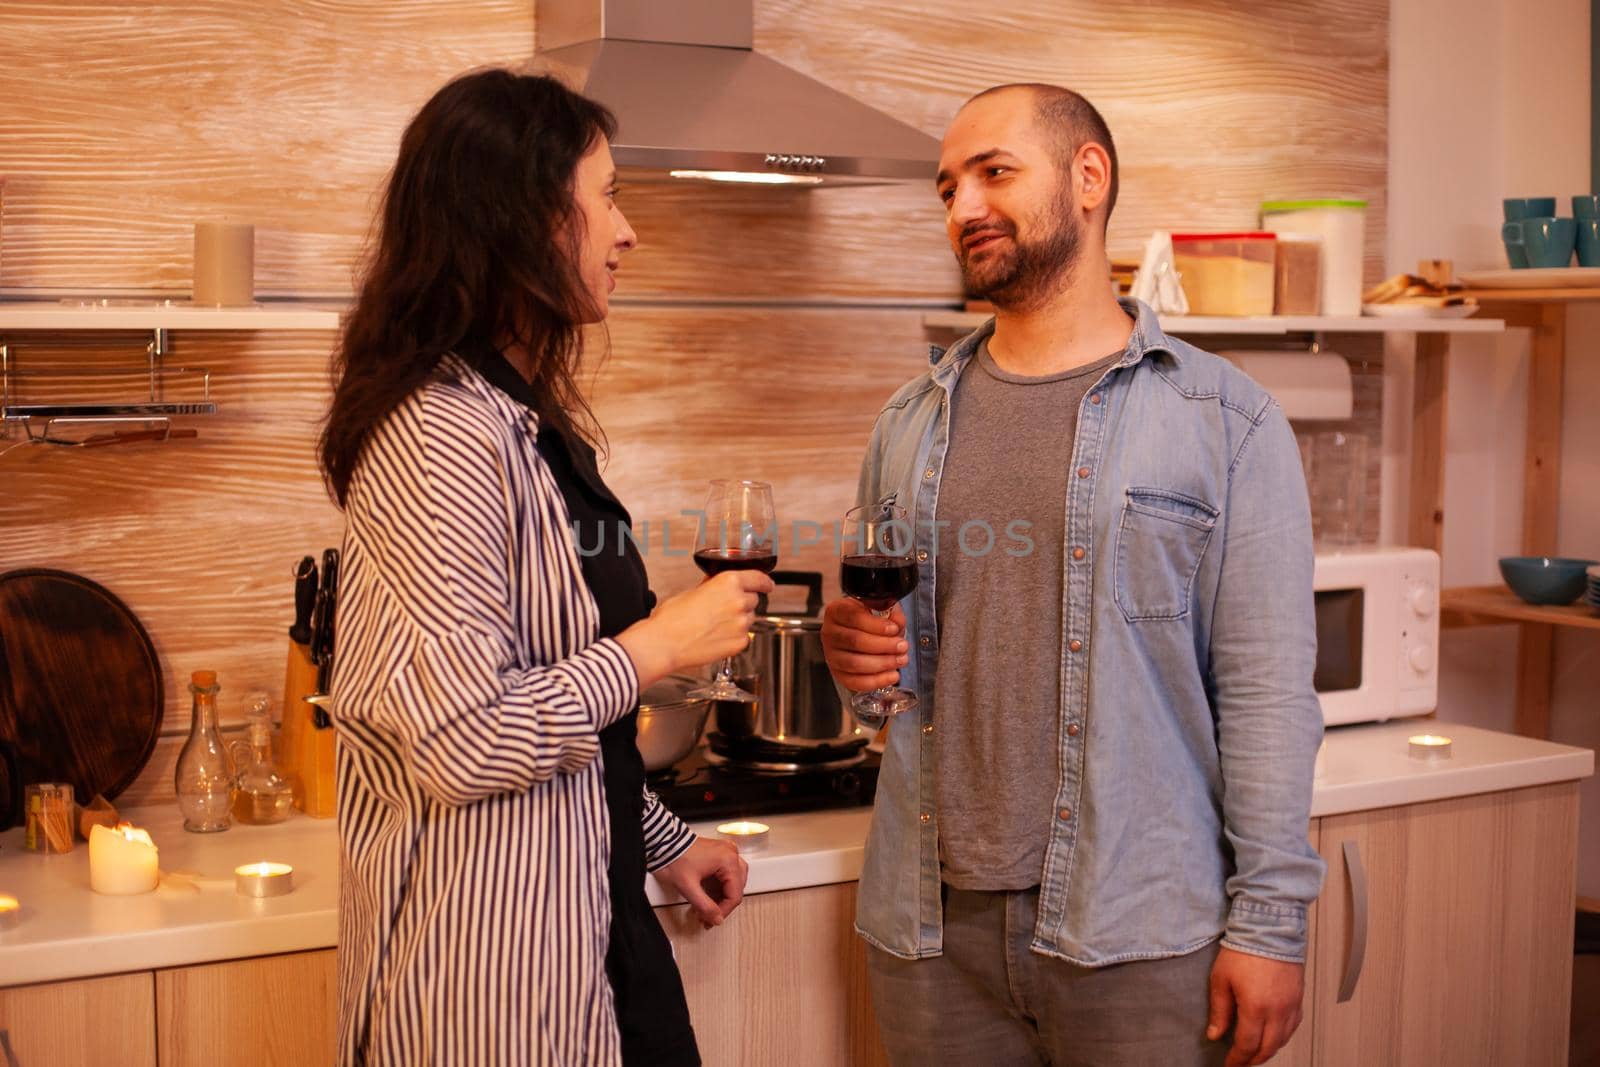 Man and woman having fun during date drinking wine. Adult couple having romantic date at home, in the kitchen, talking, smiling, enjoying the meal in dining room.